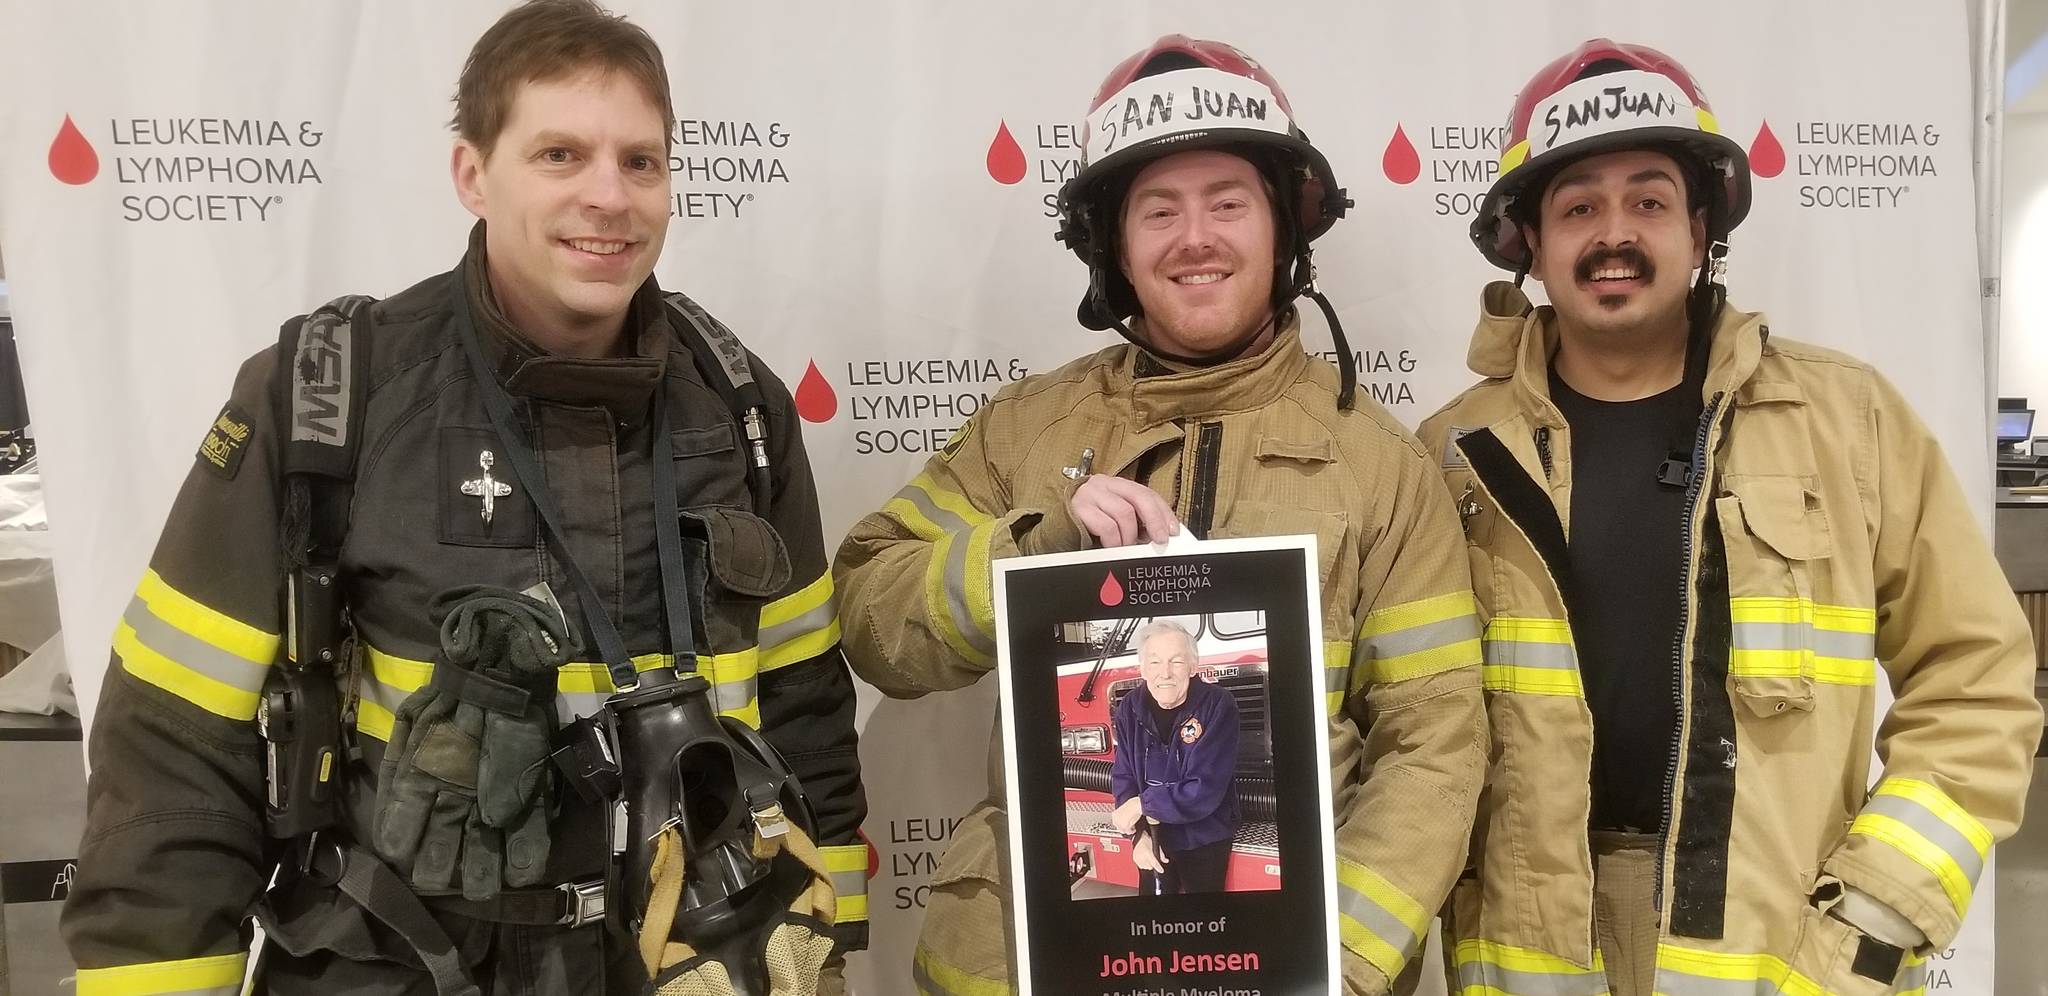 San Juan Island firefighters participate in stair climb challenge